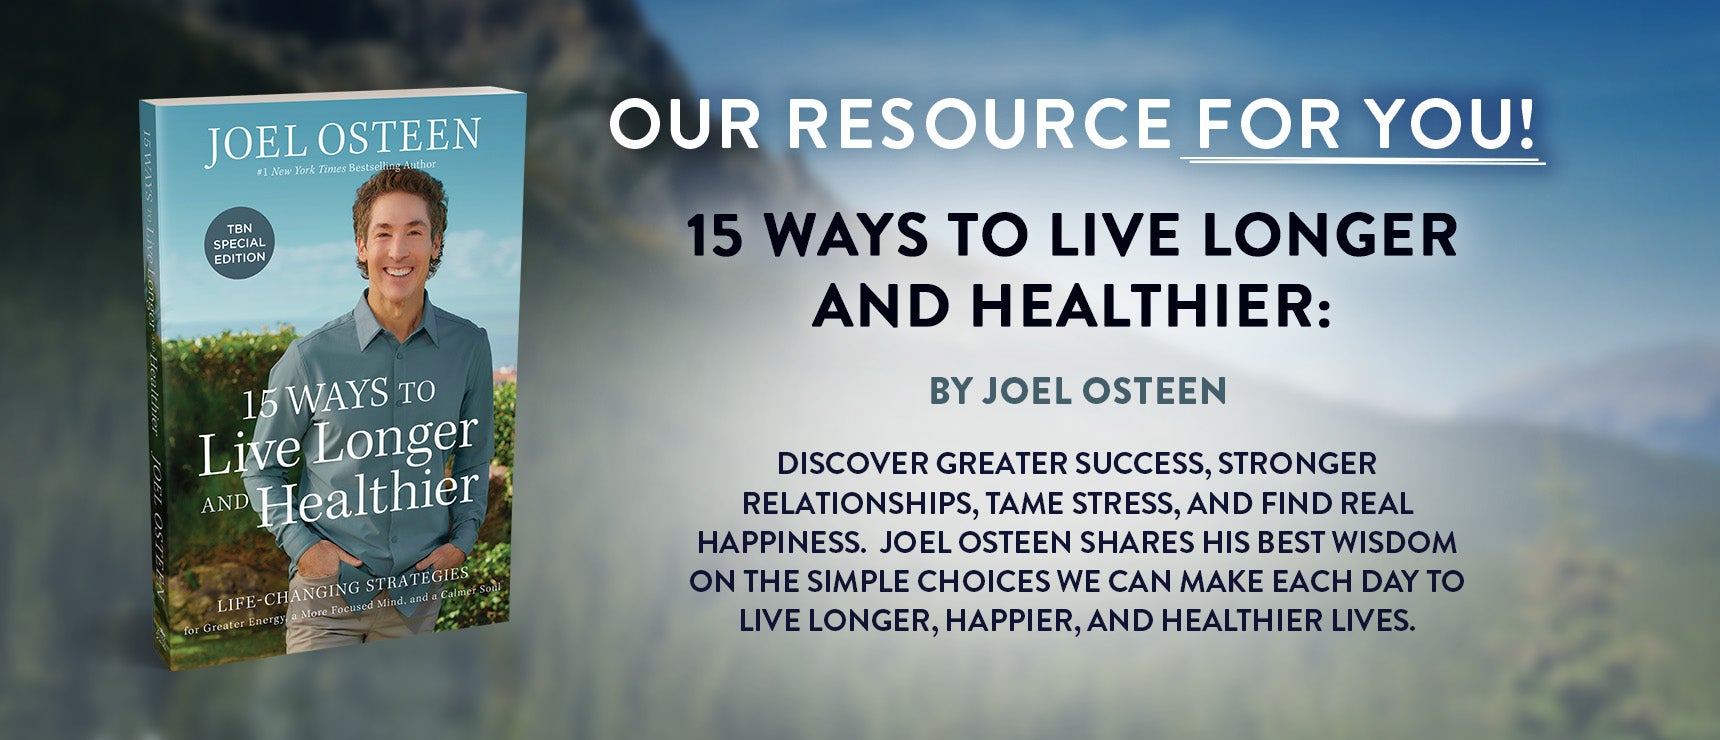 15 Ways to Live Longer and Healthier by Joel Osteen on TBN